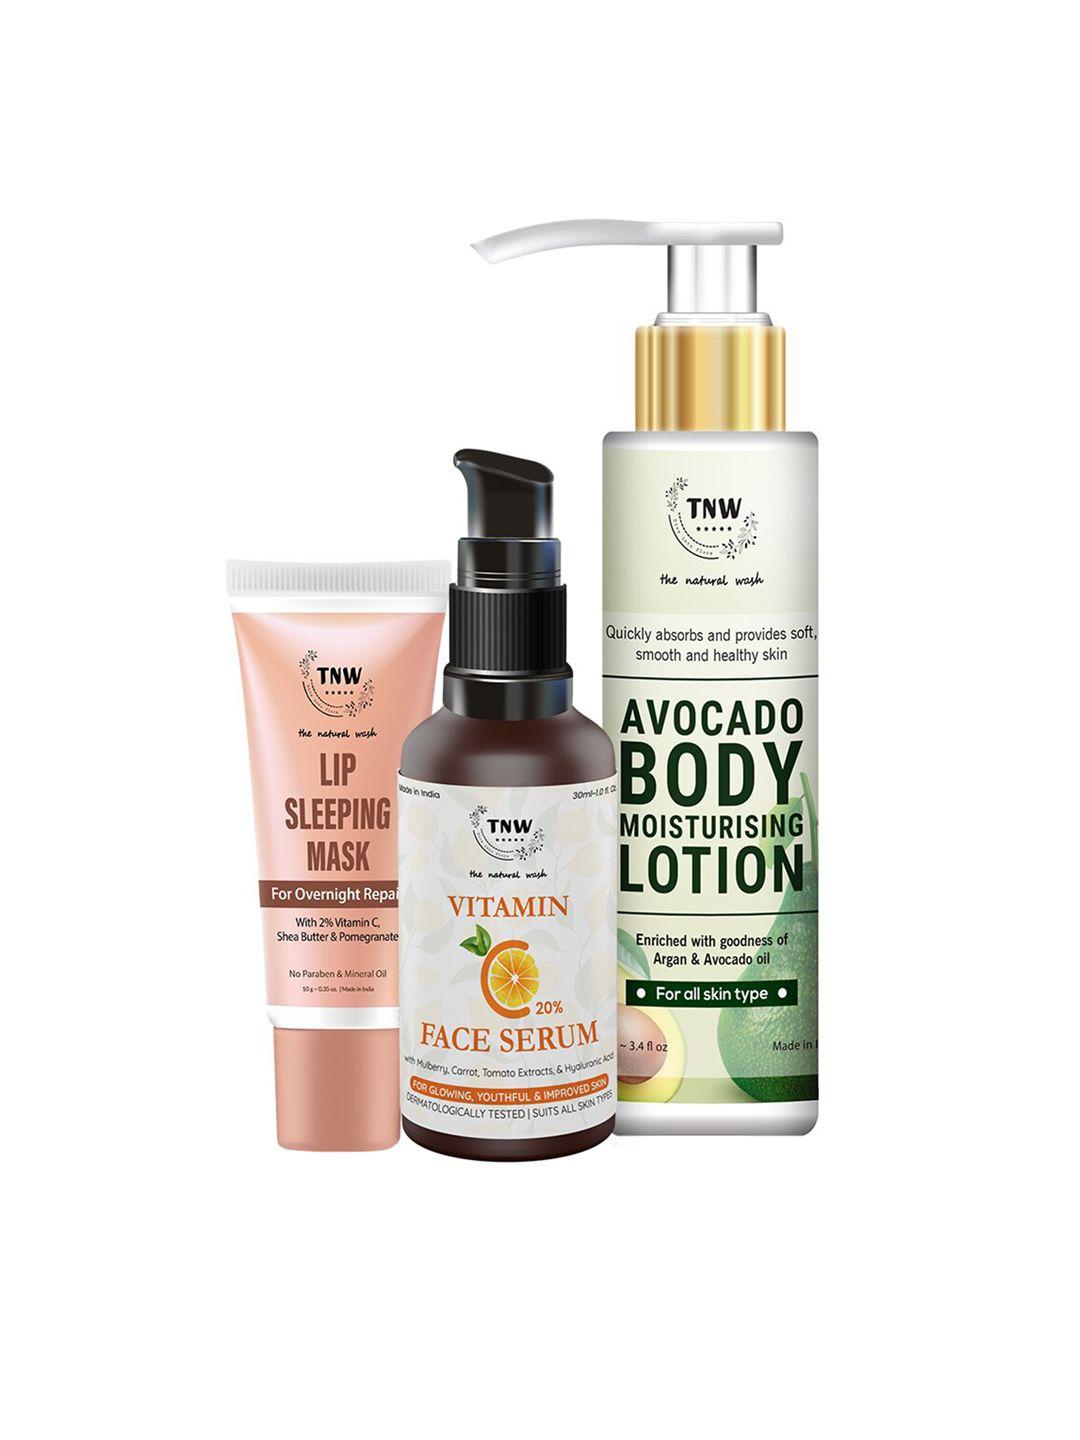 tnw the natural wash set of face serum - body lotion & lip sleeping mask